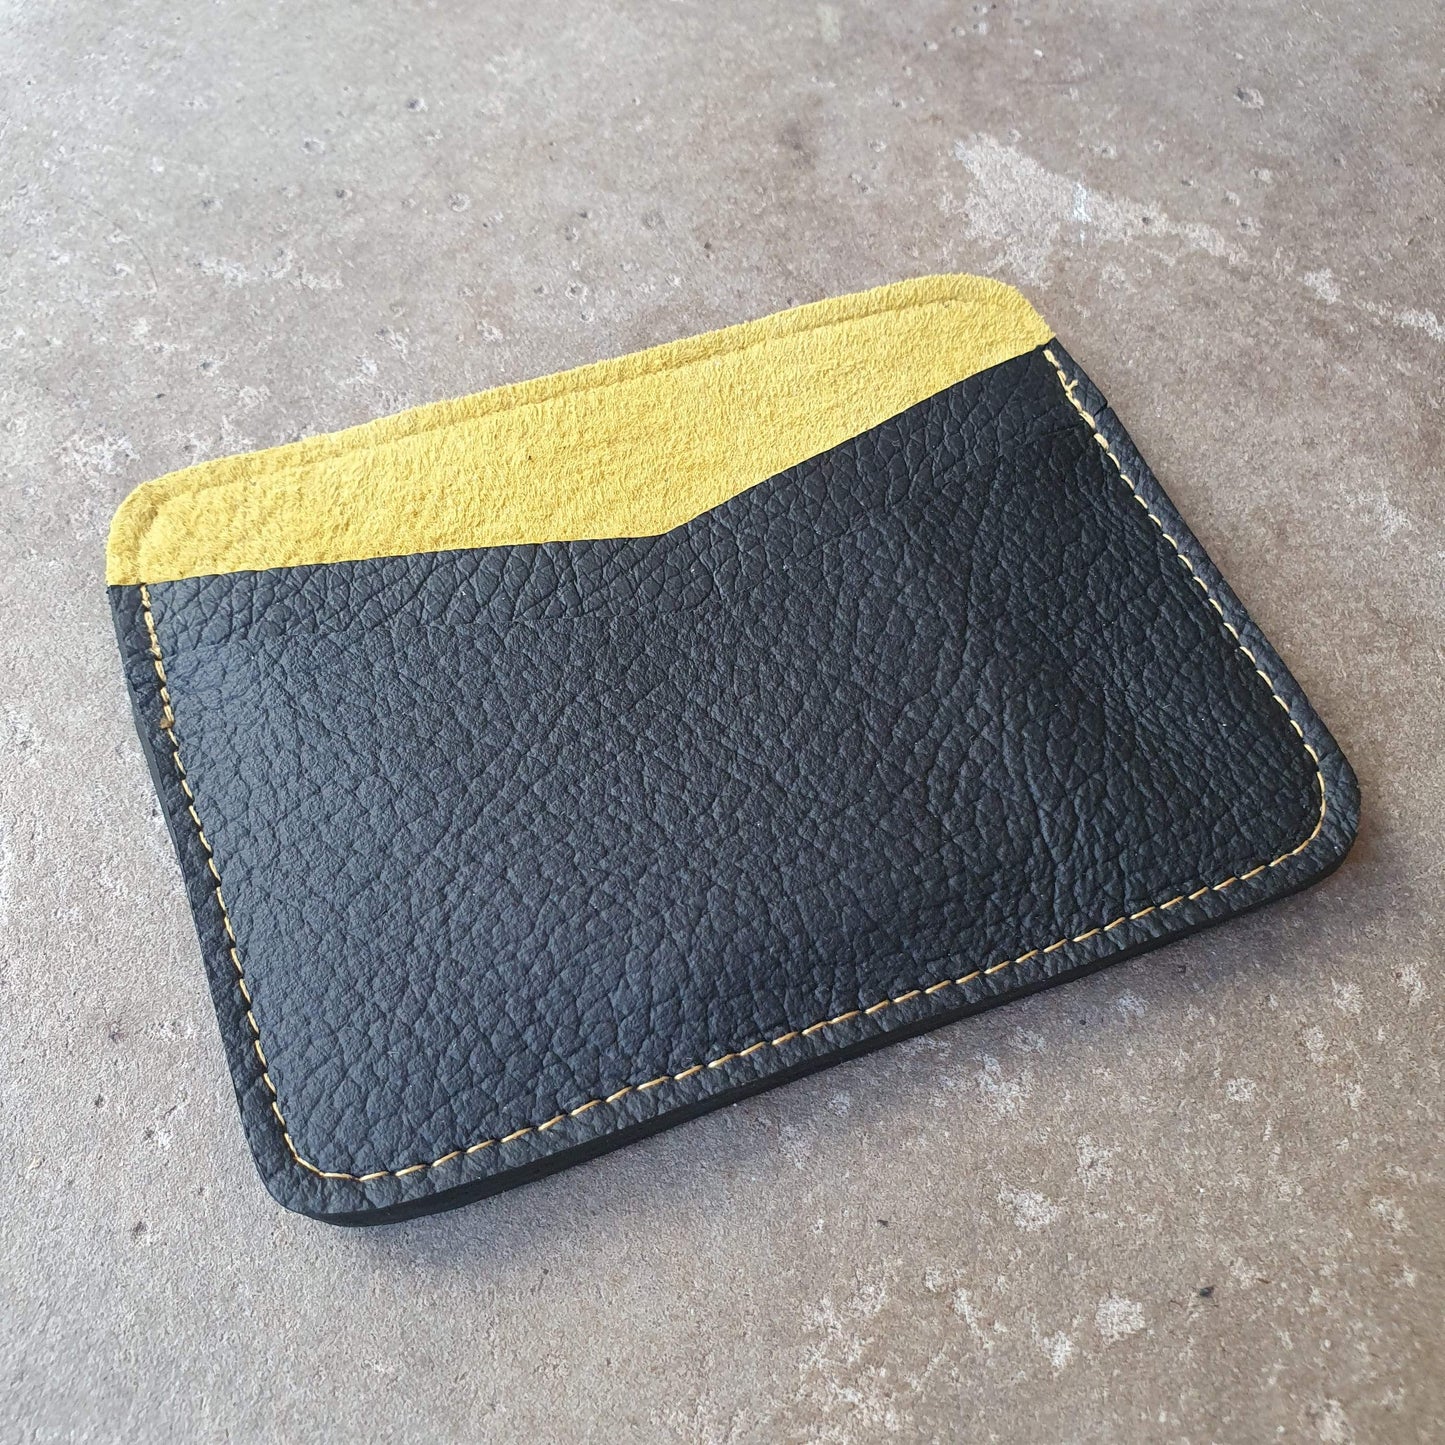 Zoe Dunn Designs Purse / Wallet Black / Mustard Card Holder - Recycled Leather